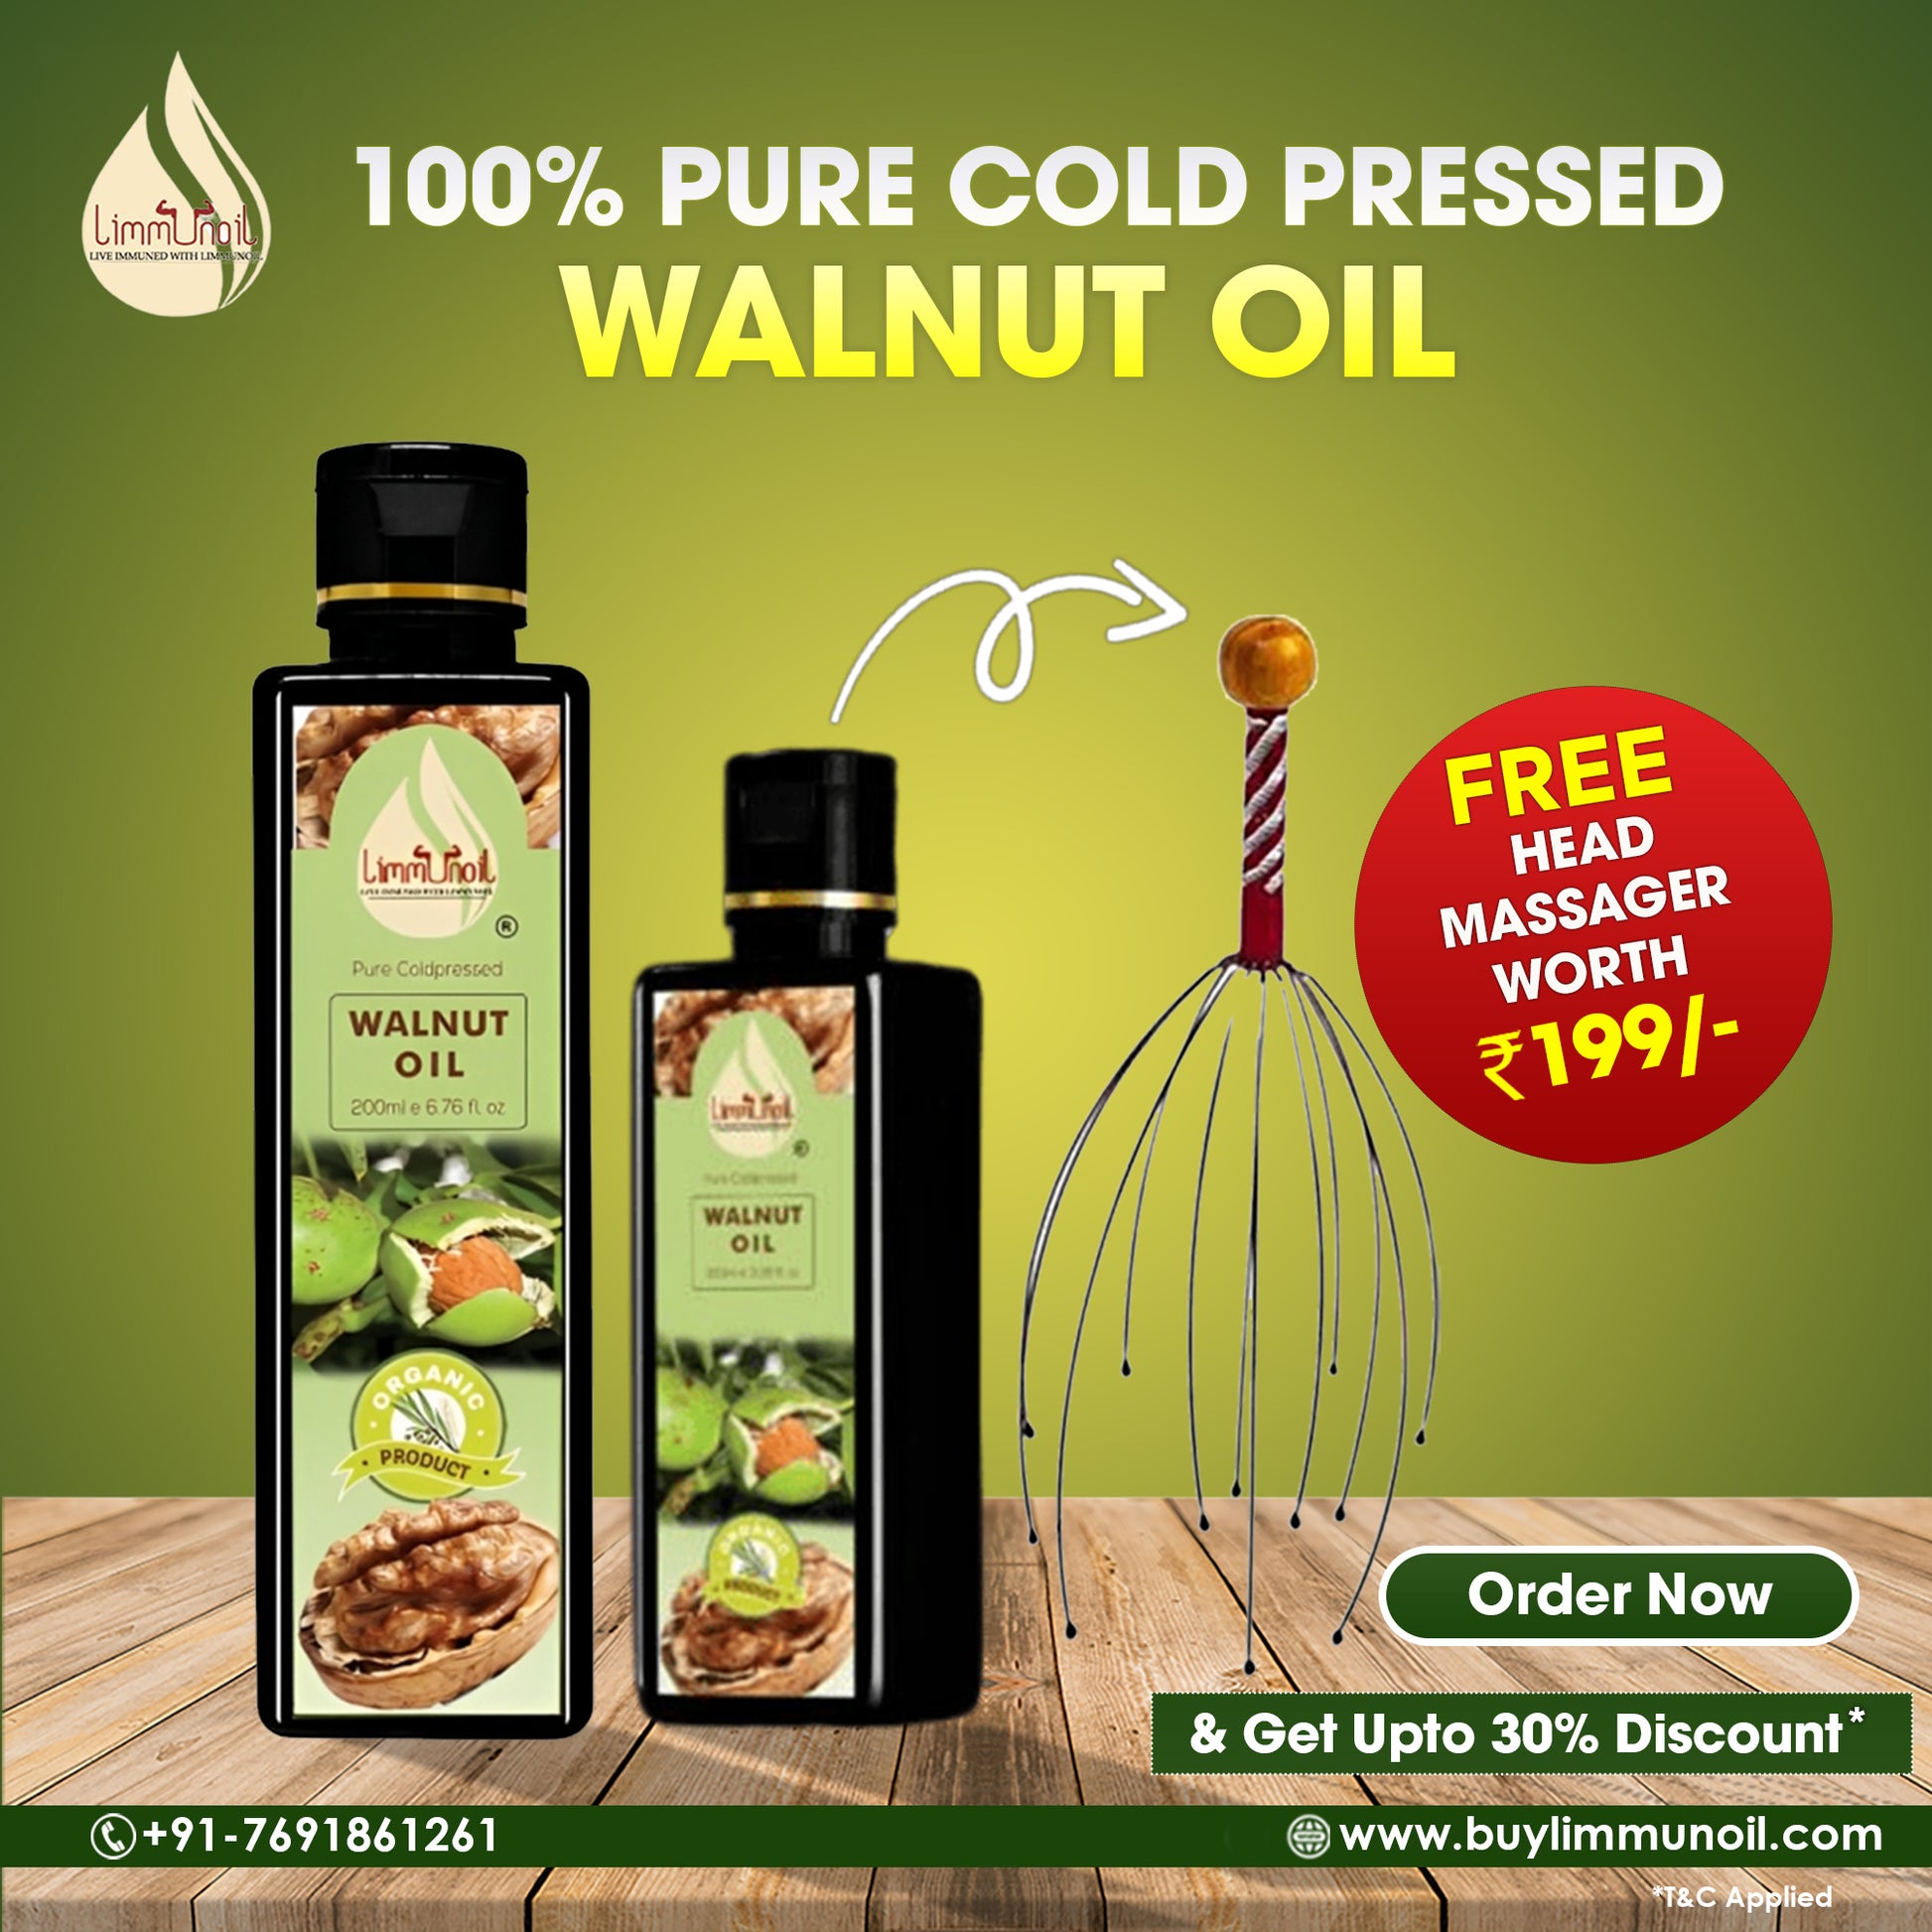 5 Promising benefits of walnut oil for healthy skin and hair